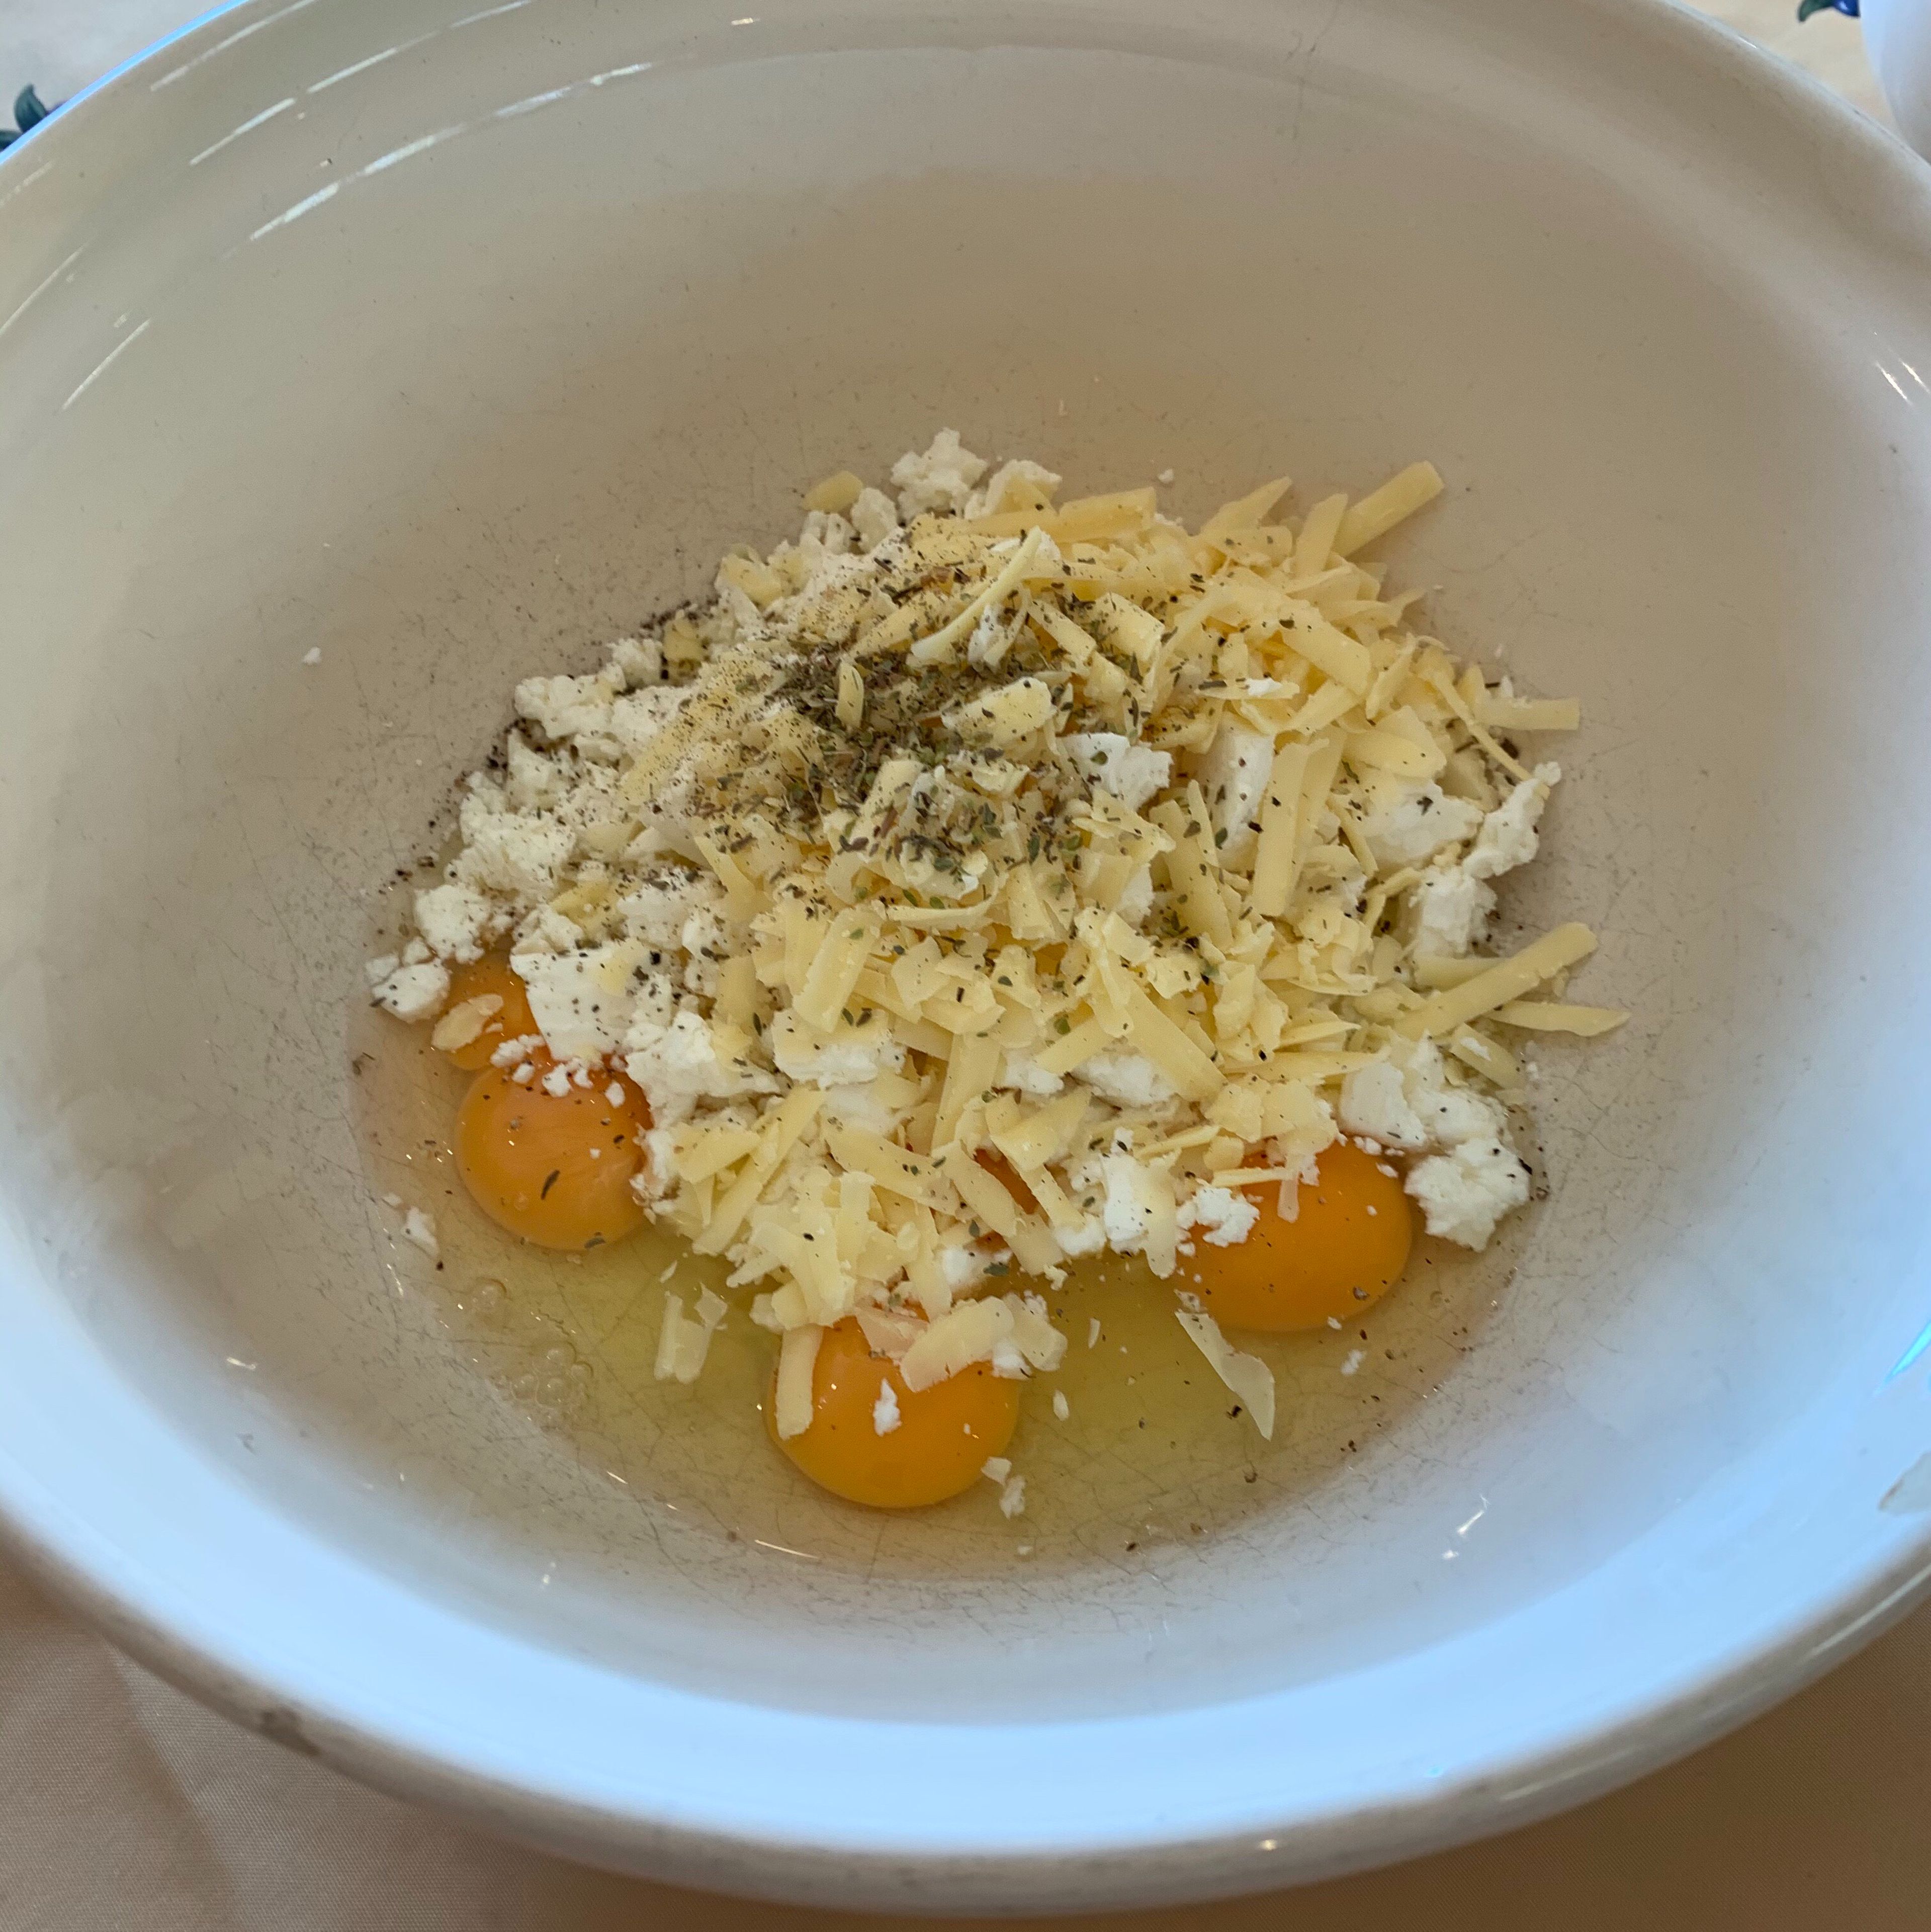 Crack the eggs into a large mixing bowl and crumble the feta . Grate the cheddar, then add the oregano and pepper